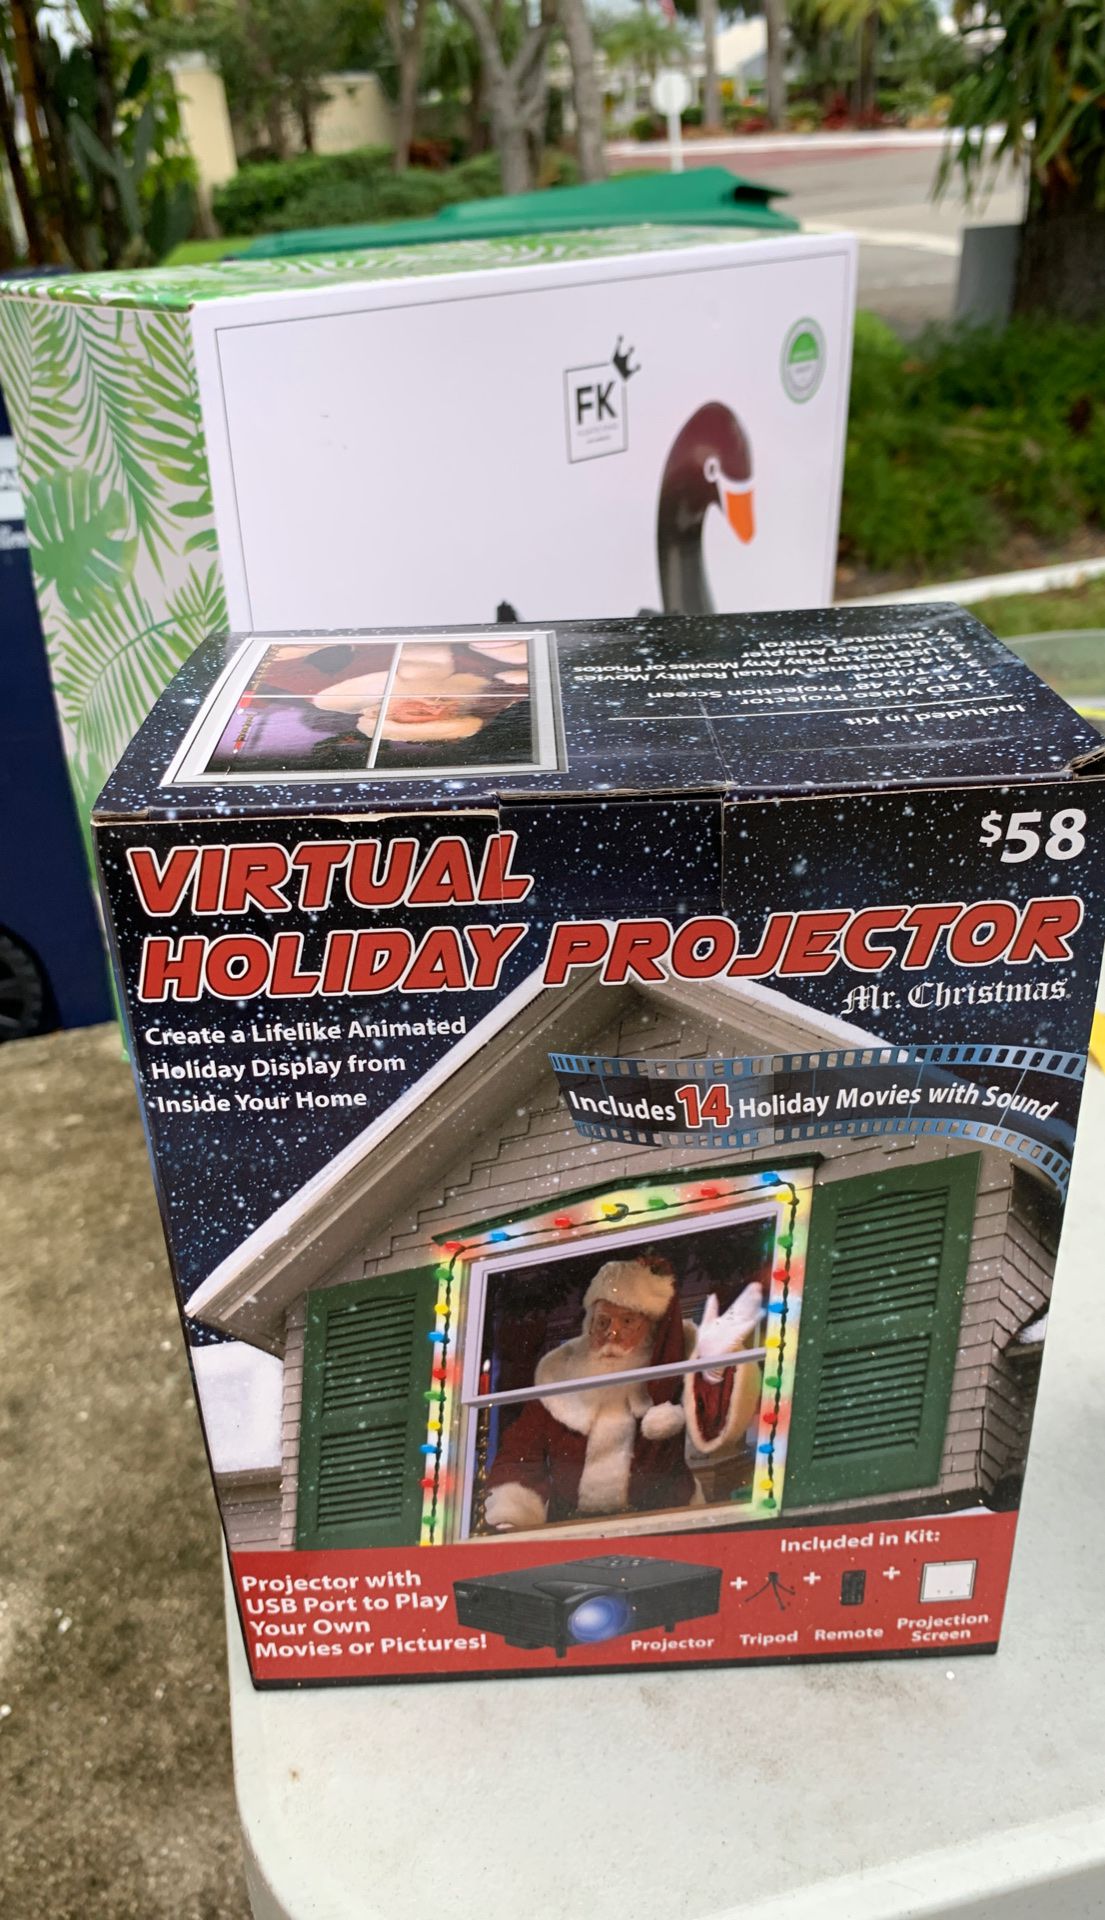 Holiday projector